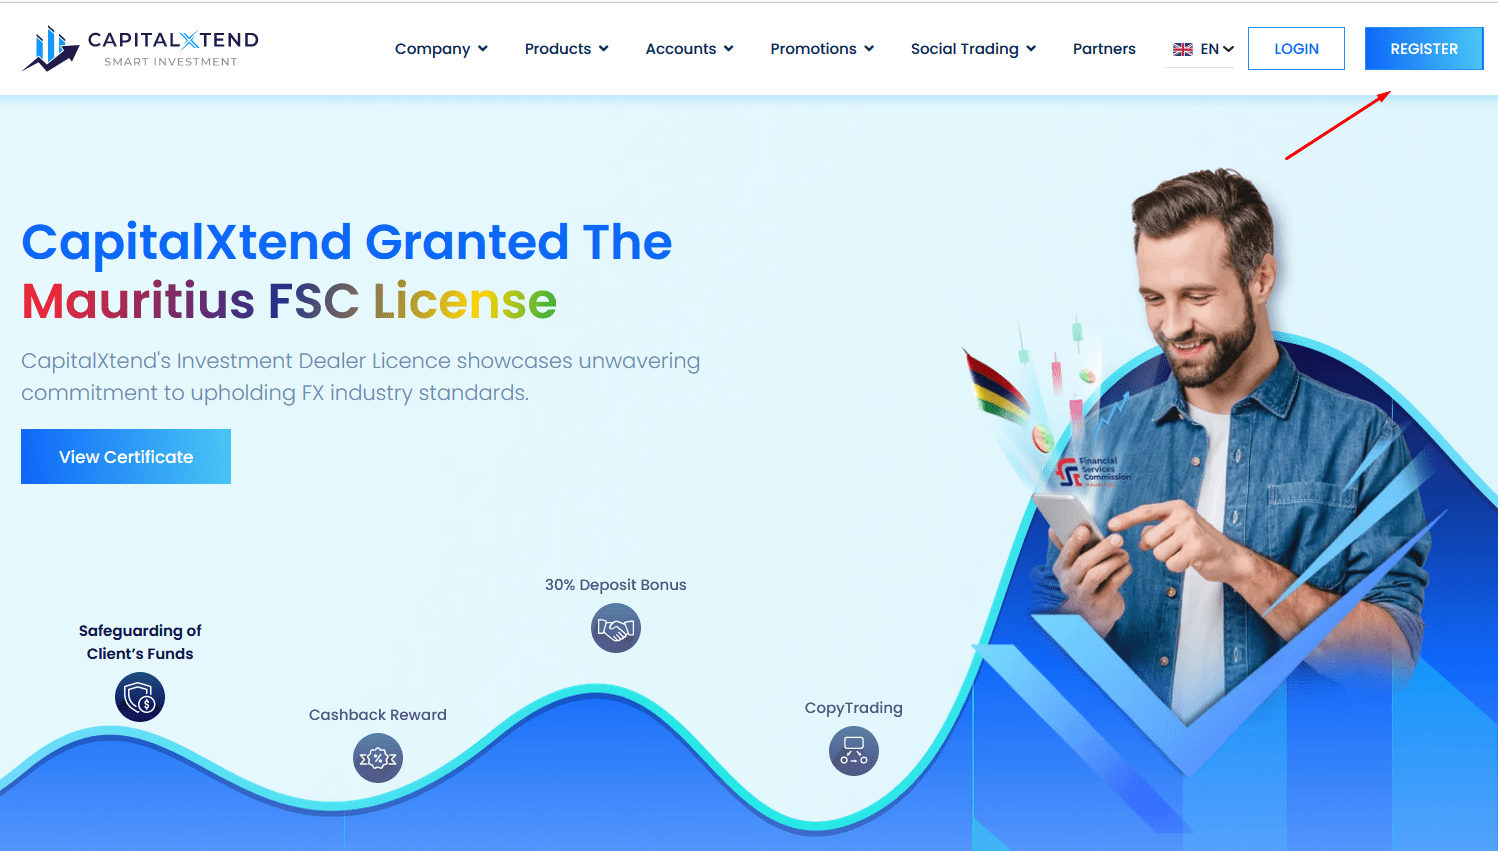 Review of CapitalXtend’s User Account — Registration